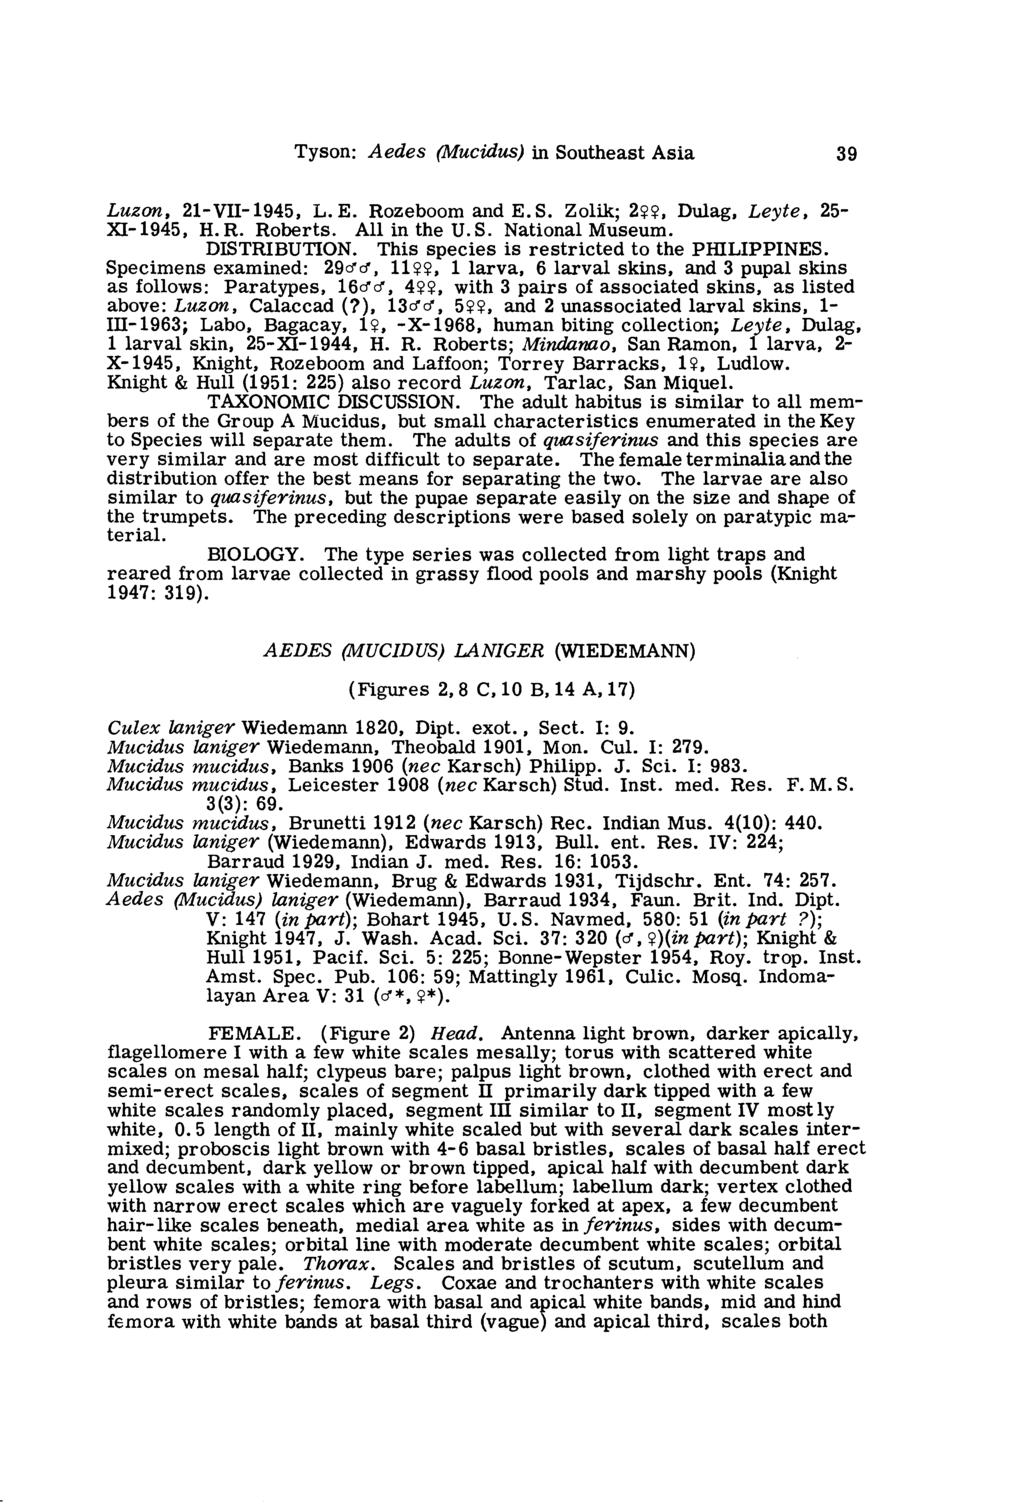 Tyson: Aedes (Mucidus) in Southeast Asia 39 LUZMZ, 21-VII-1945, L. E. Rozeboom and E. S. Zolik; 2??, Dulag, Leyte, 25- XI- 1945, H. R. Roberts. All in the U.S. National Museum. DISTRIBUTION.